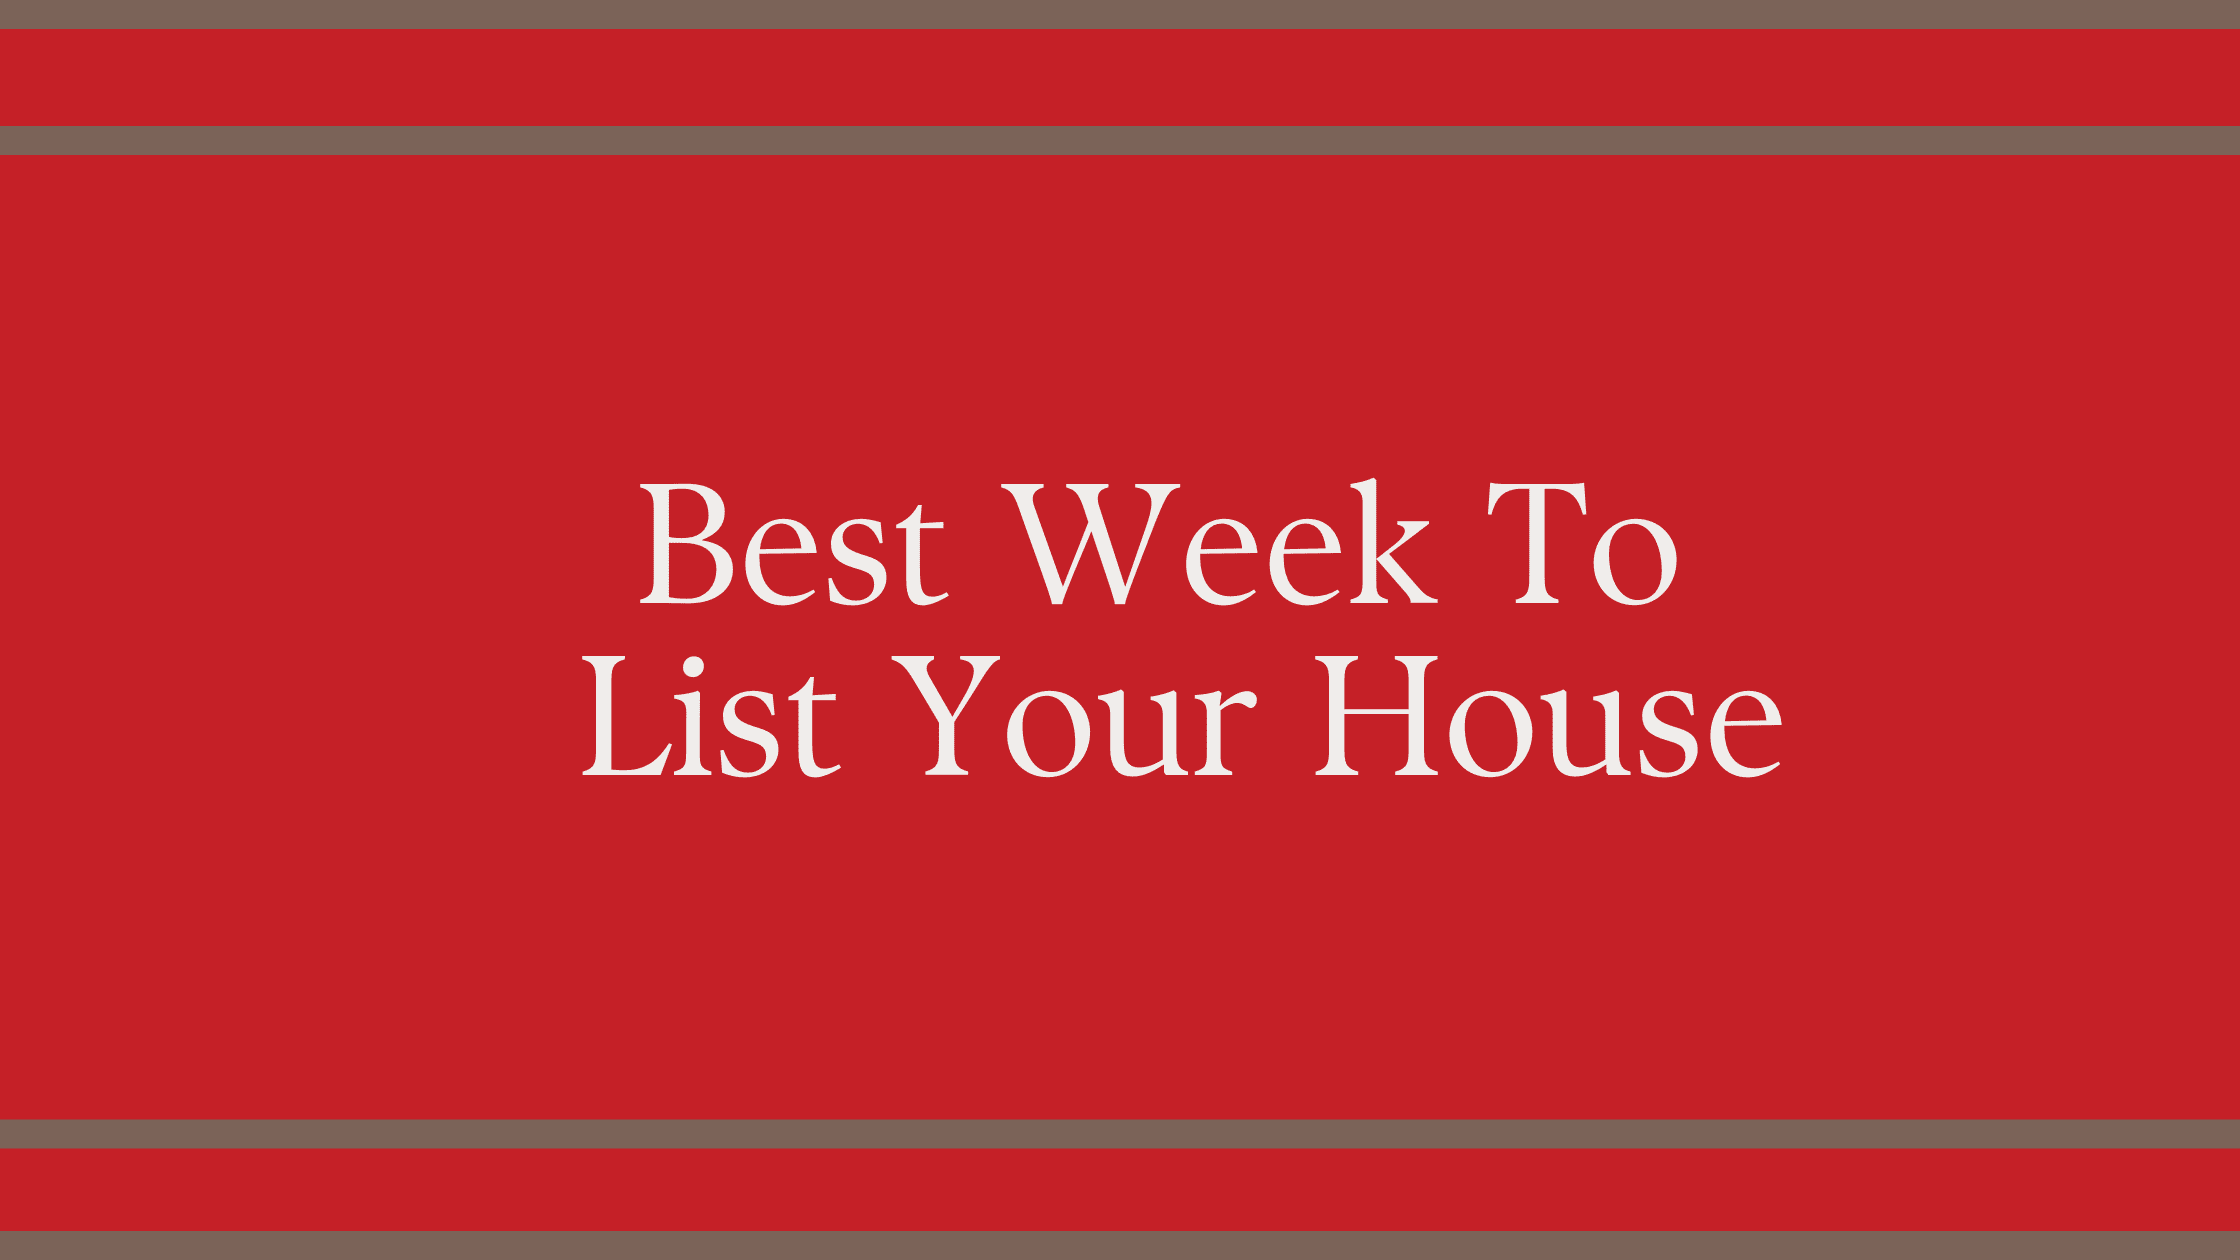 Best Week To List Your House